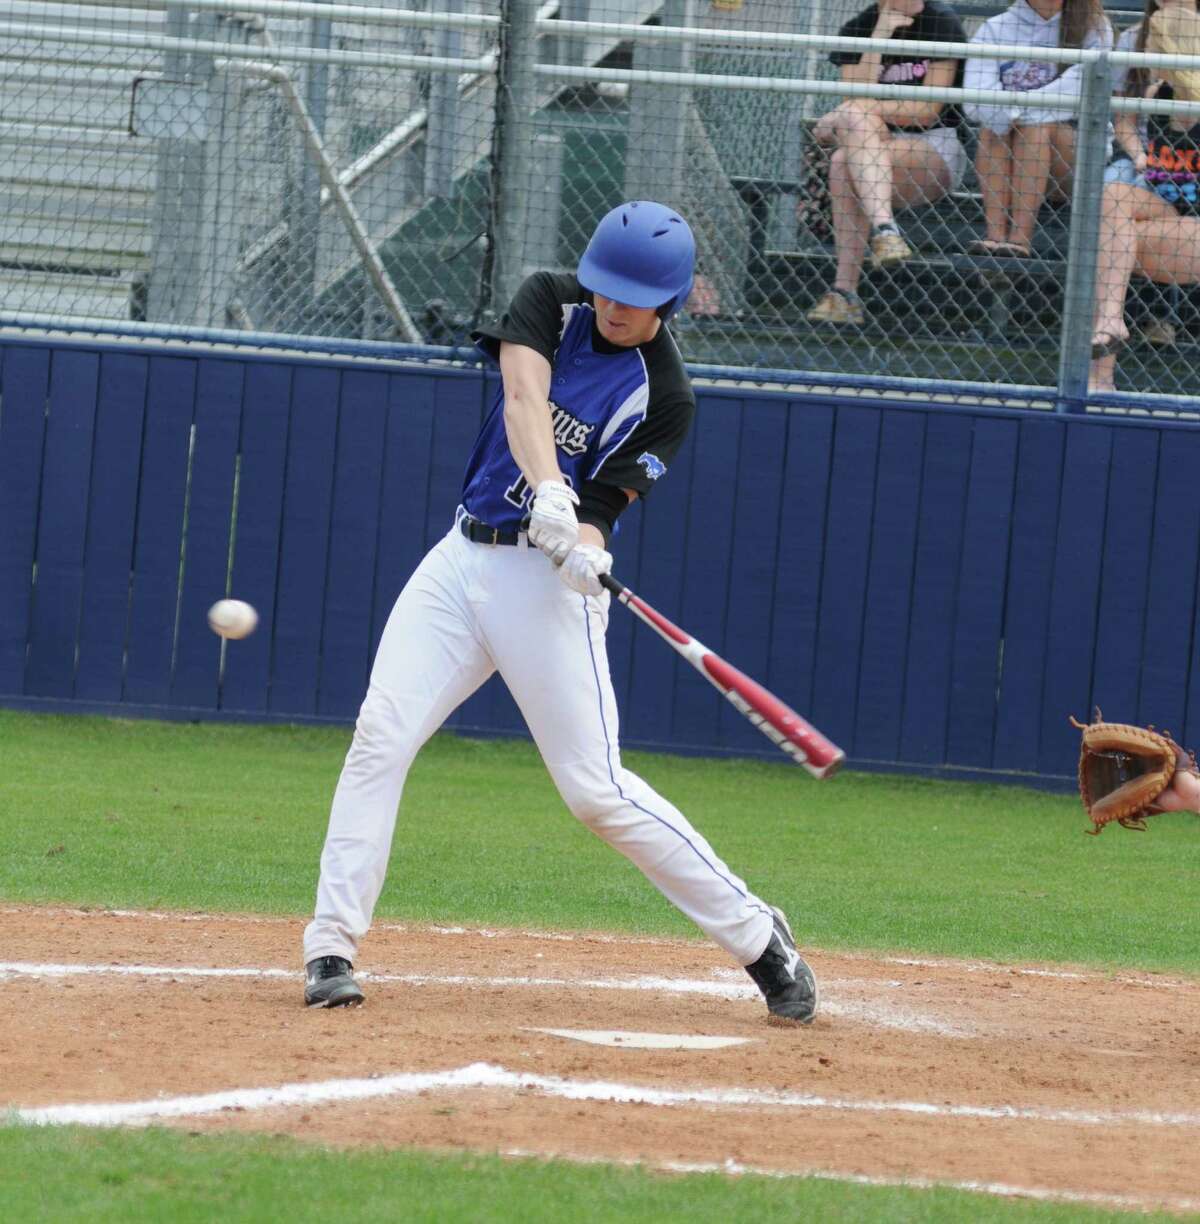 Friendswood senior Jared Gaspard and his teammates face Santa Fe in the 2012 Class 4A Region III baseball quarterfinals on today and Friday, May 17-18, in 7 p.m. starts at Pearland High School.